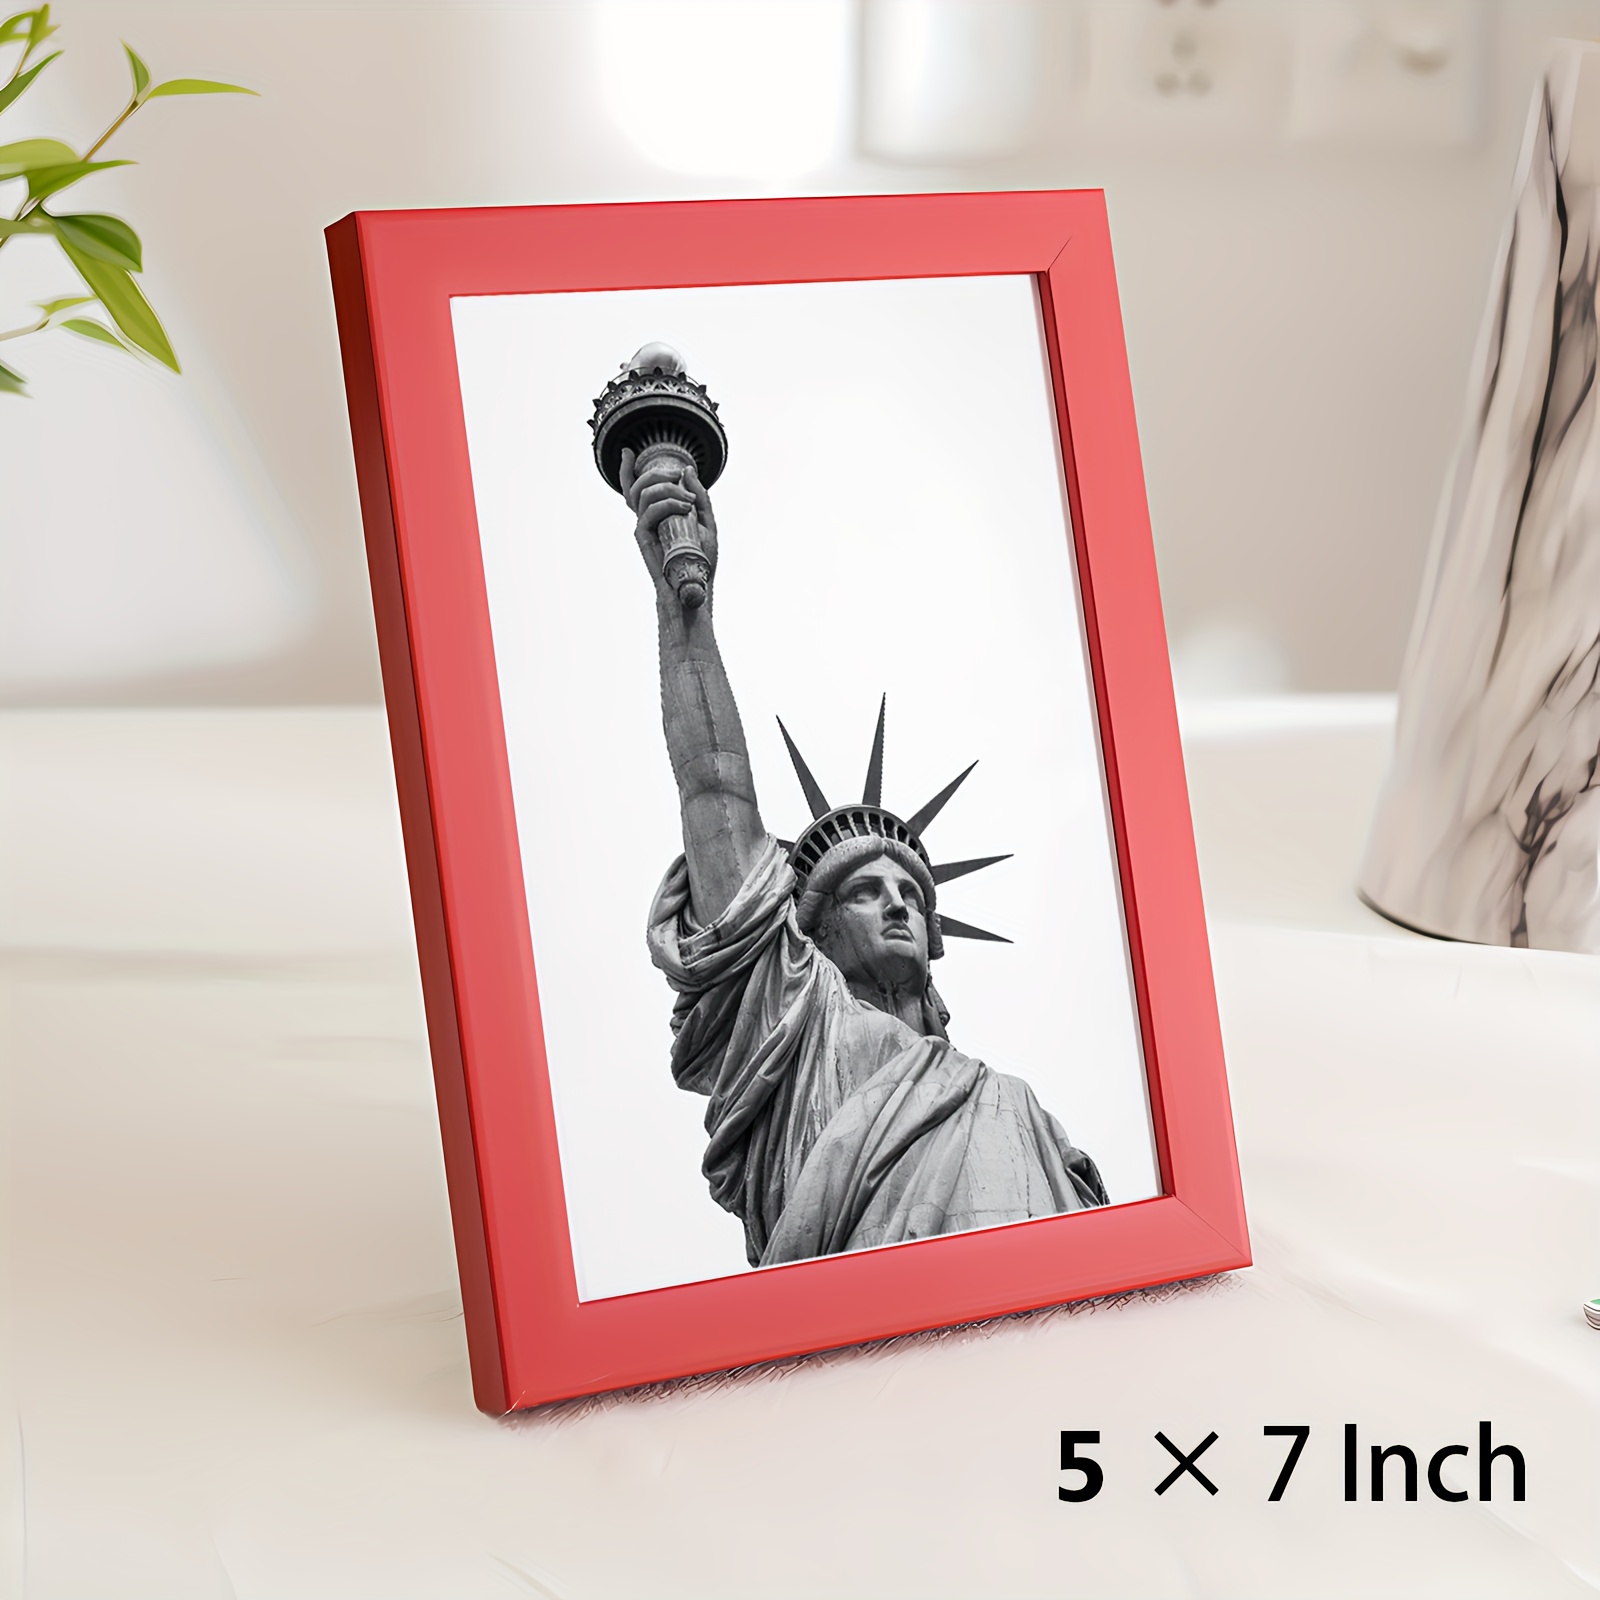 Wall Mounted Buy Photo Frame 6x4 Inch